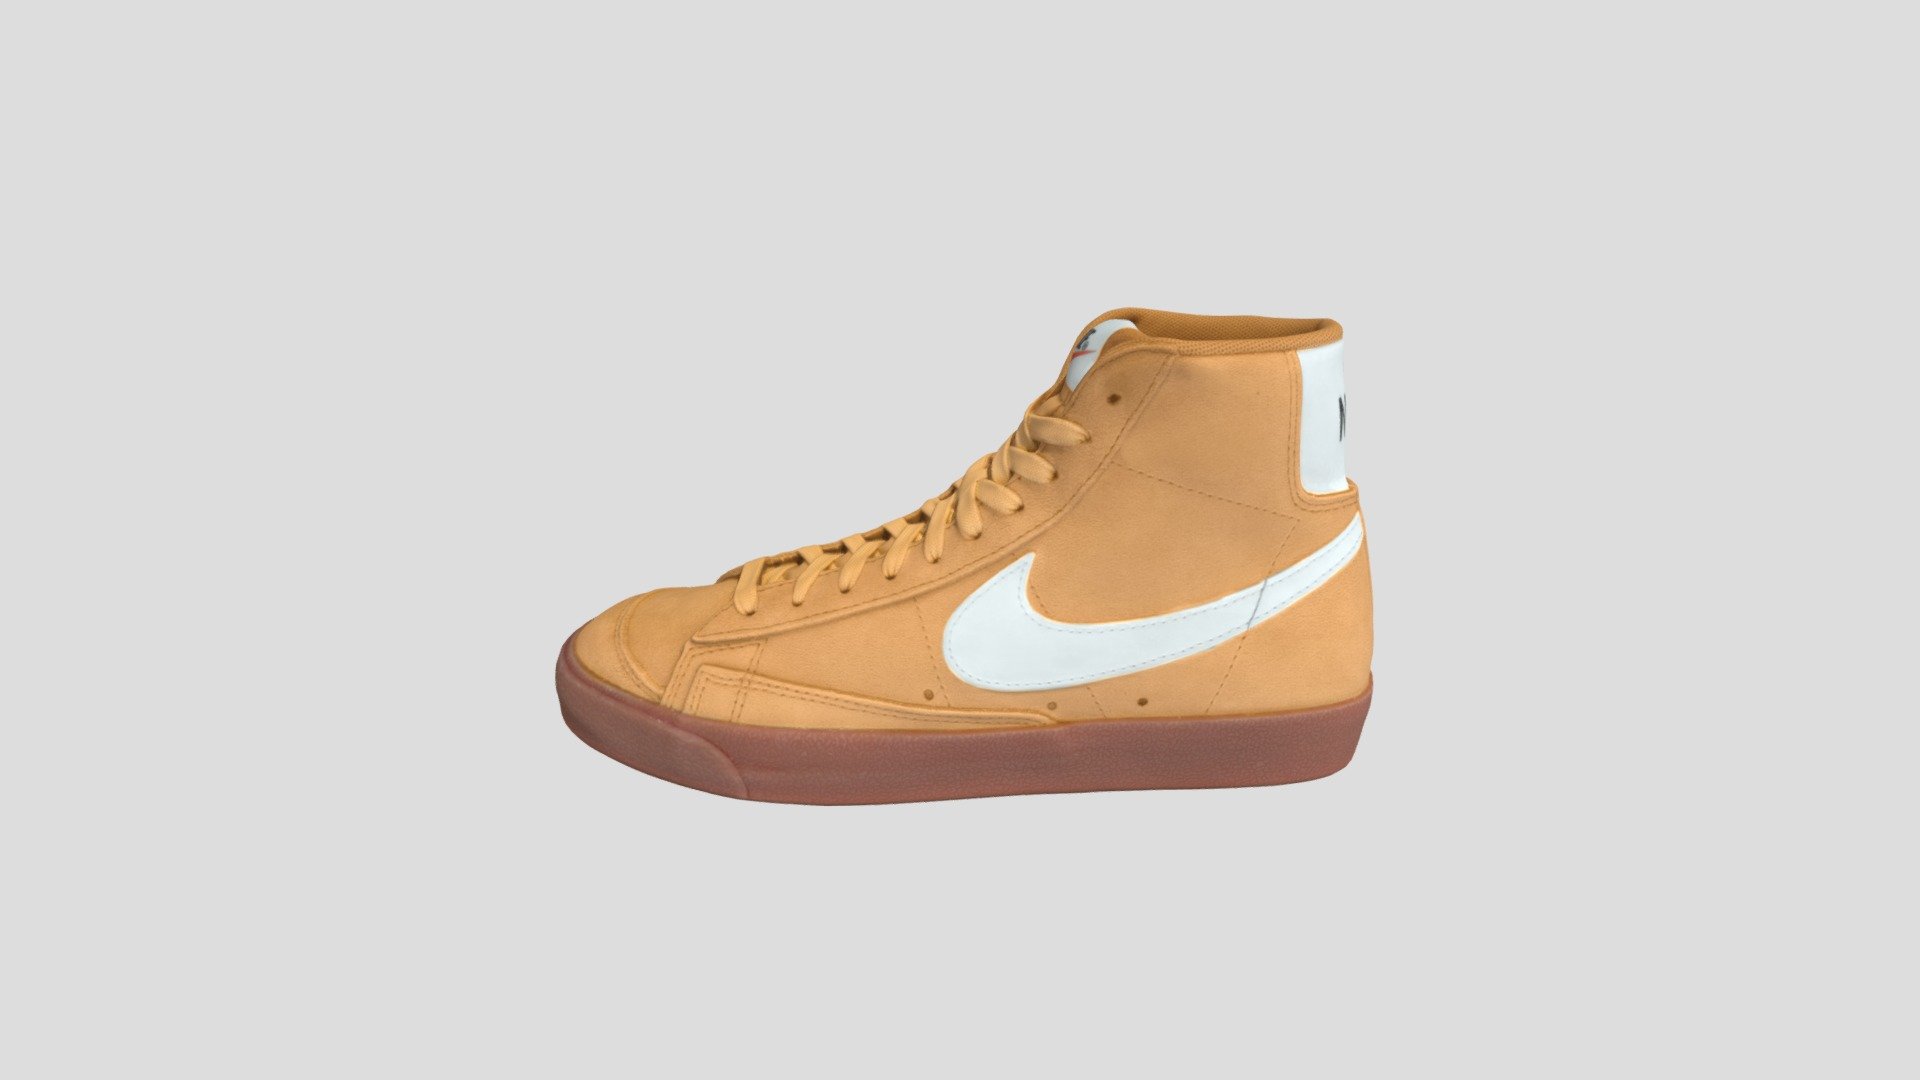 This model was created firstly by 3D scanning on retail version, and then being detail-improved manually, thus a 1:1 repulica of the original
PBR ready
Low-poly
4K texture
Welcome to check out other models we have to offer. And we do accept custom orders as well :) - Nike Blazer Mid '77 小麦色 棕黄 生胶 女款_DB5461-700 - Buy Royalty Free 3D model by TRARGUS 3d model